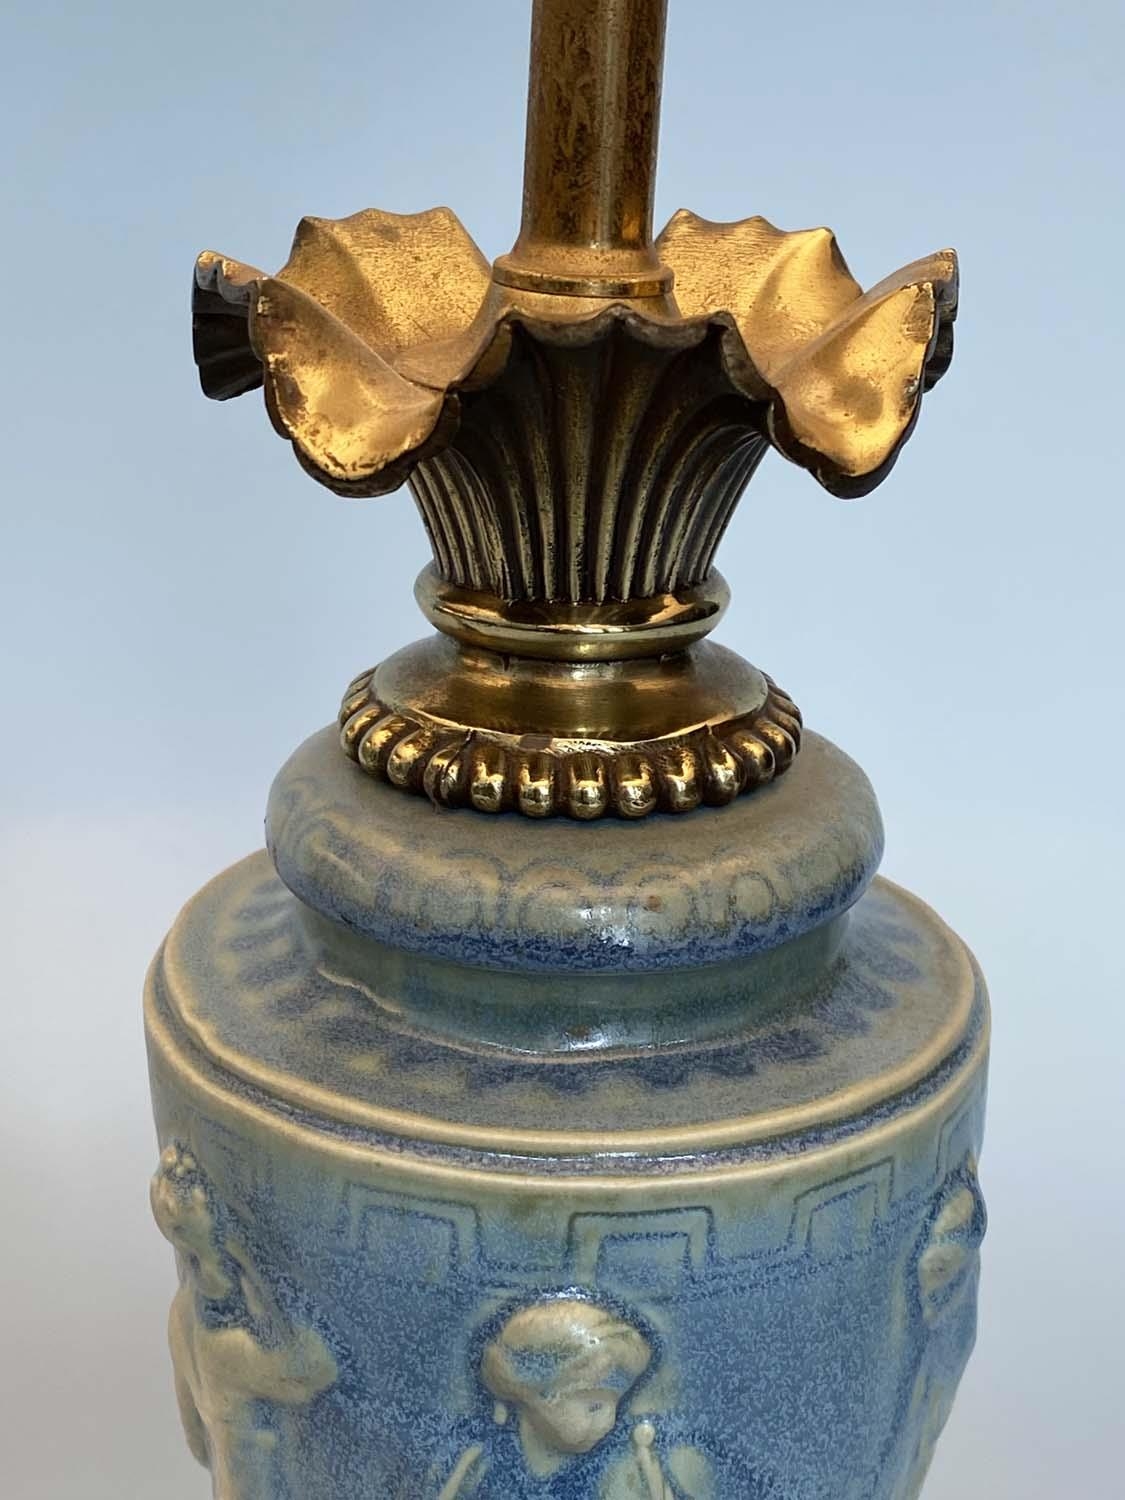 TABLE LAMPS, a pair, Neo Classical vase form blue and white Wedgewood style ceramic, gilt metal - Image 6 of 6